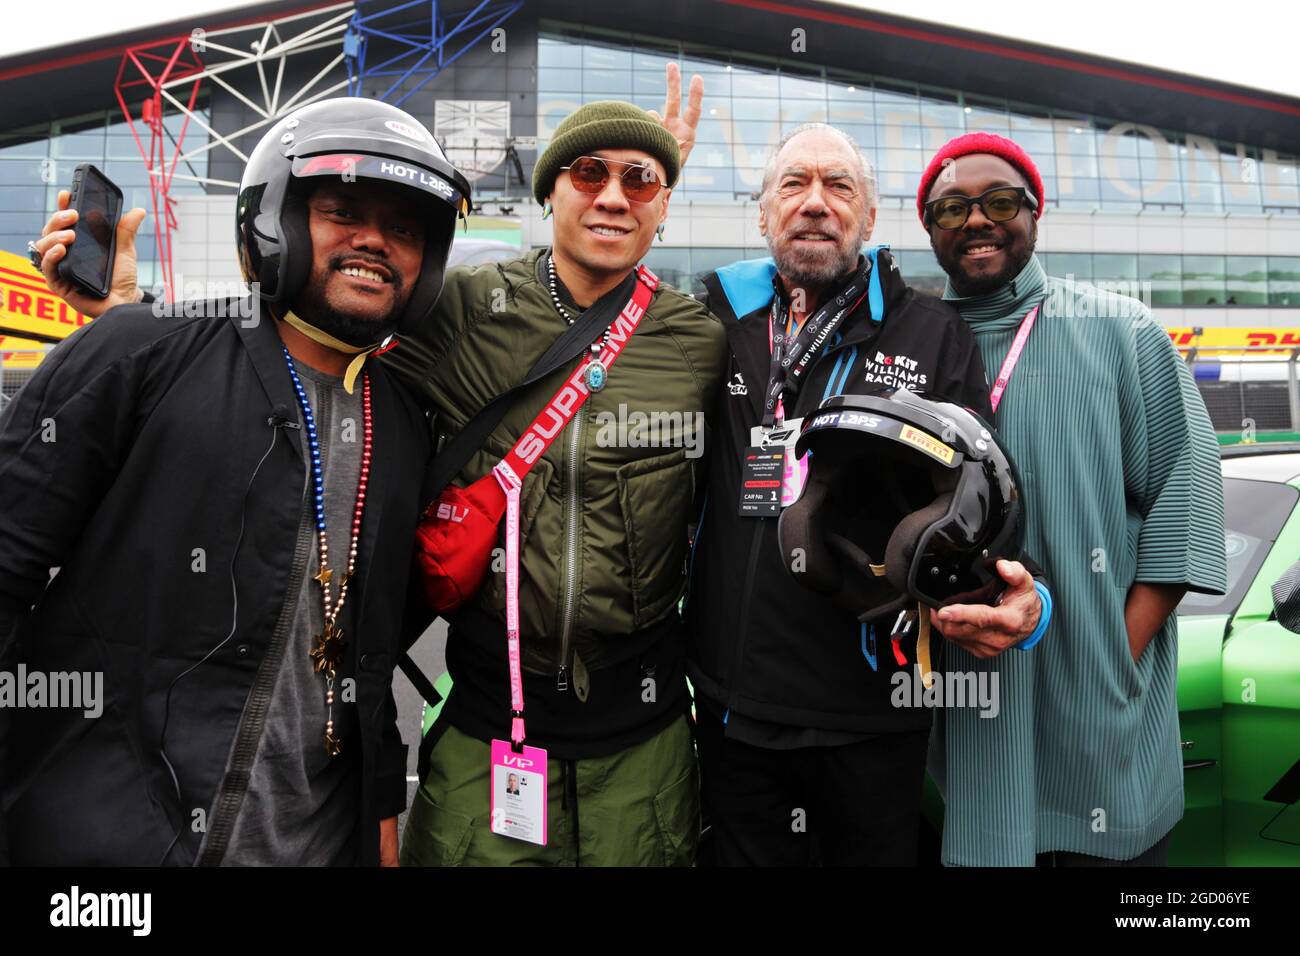 (L to R): apl.de.ap (USA) Black Eyed Peas; Taboo (USA) Black Eyed Peas; John Paul DeJoria (USA) ROK Group Co-Founder - Williams Racing guest; will.i.am (USA) Black Eyed Peas. British Grand Prix, Saturday 13th July 2019. Silverstone, England. Stock Photo